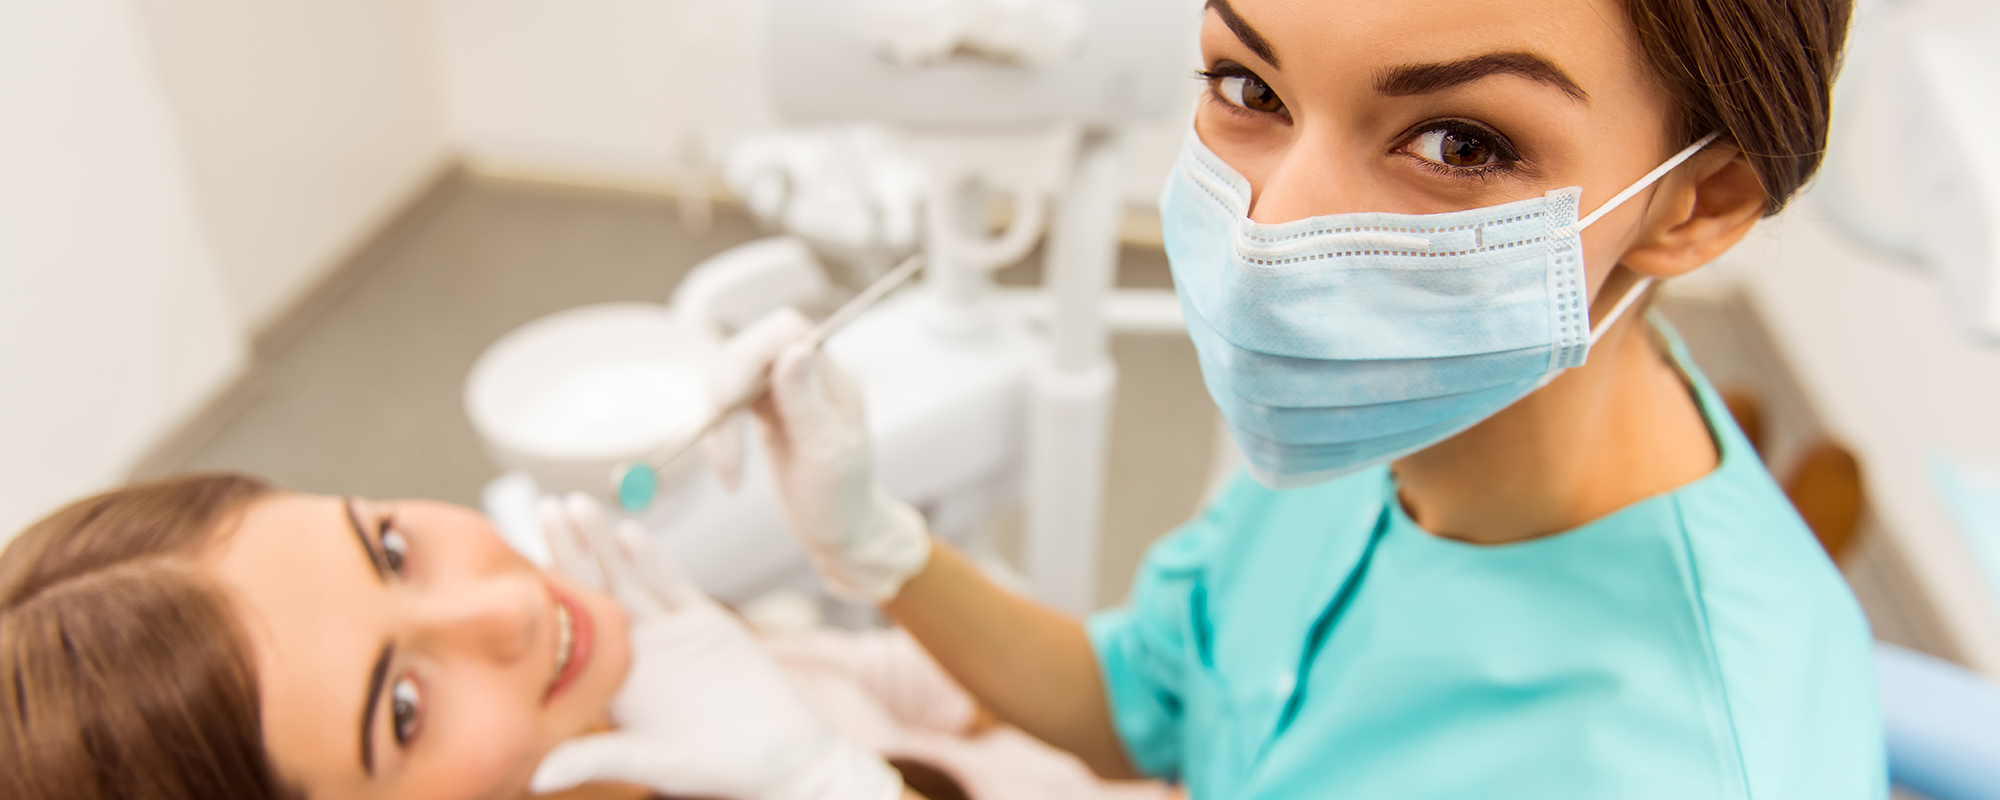 Thinking of becoming a <span>Dental Assistant?</span>